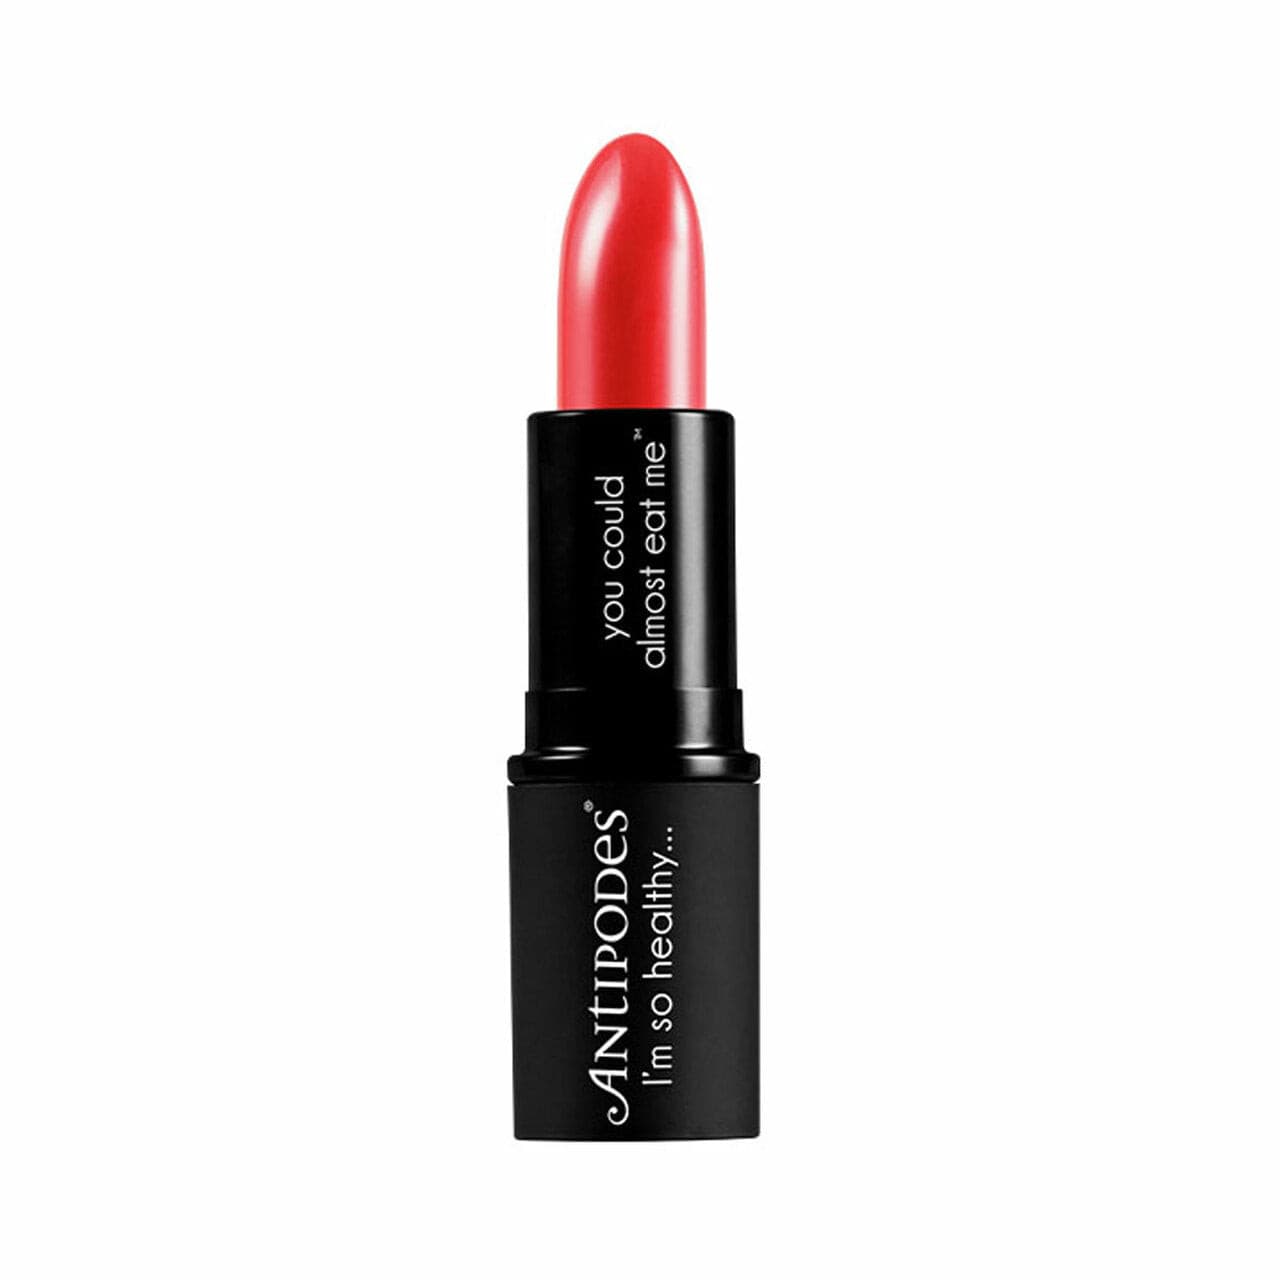 Antipodes Moisture-Boost Natural Lipstick 4g - South Pacific Coral.